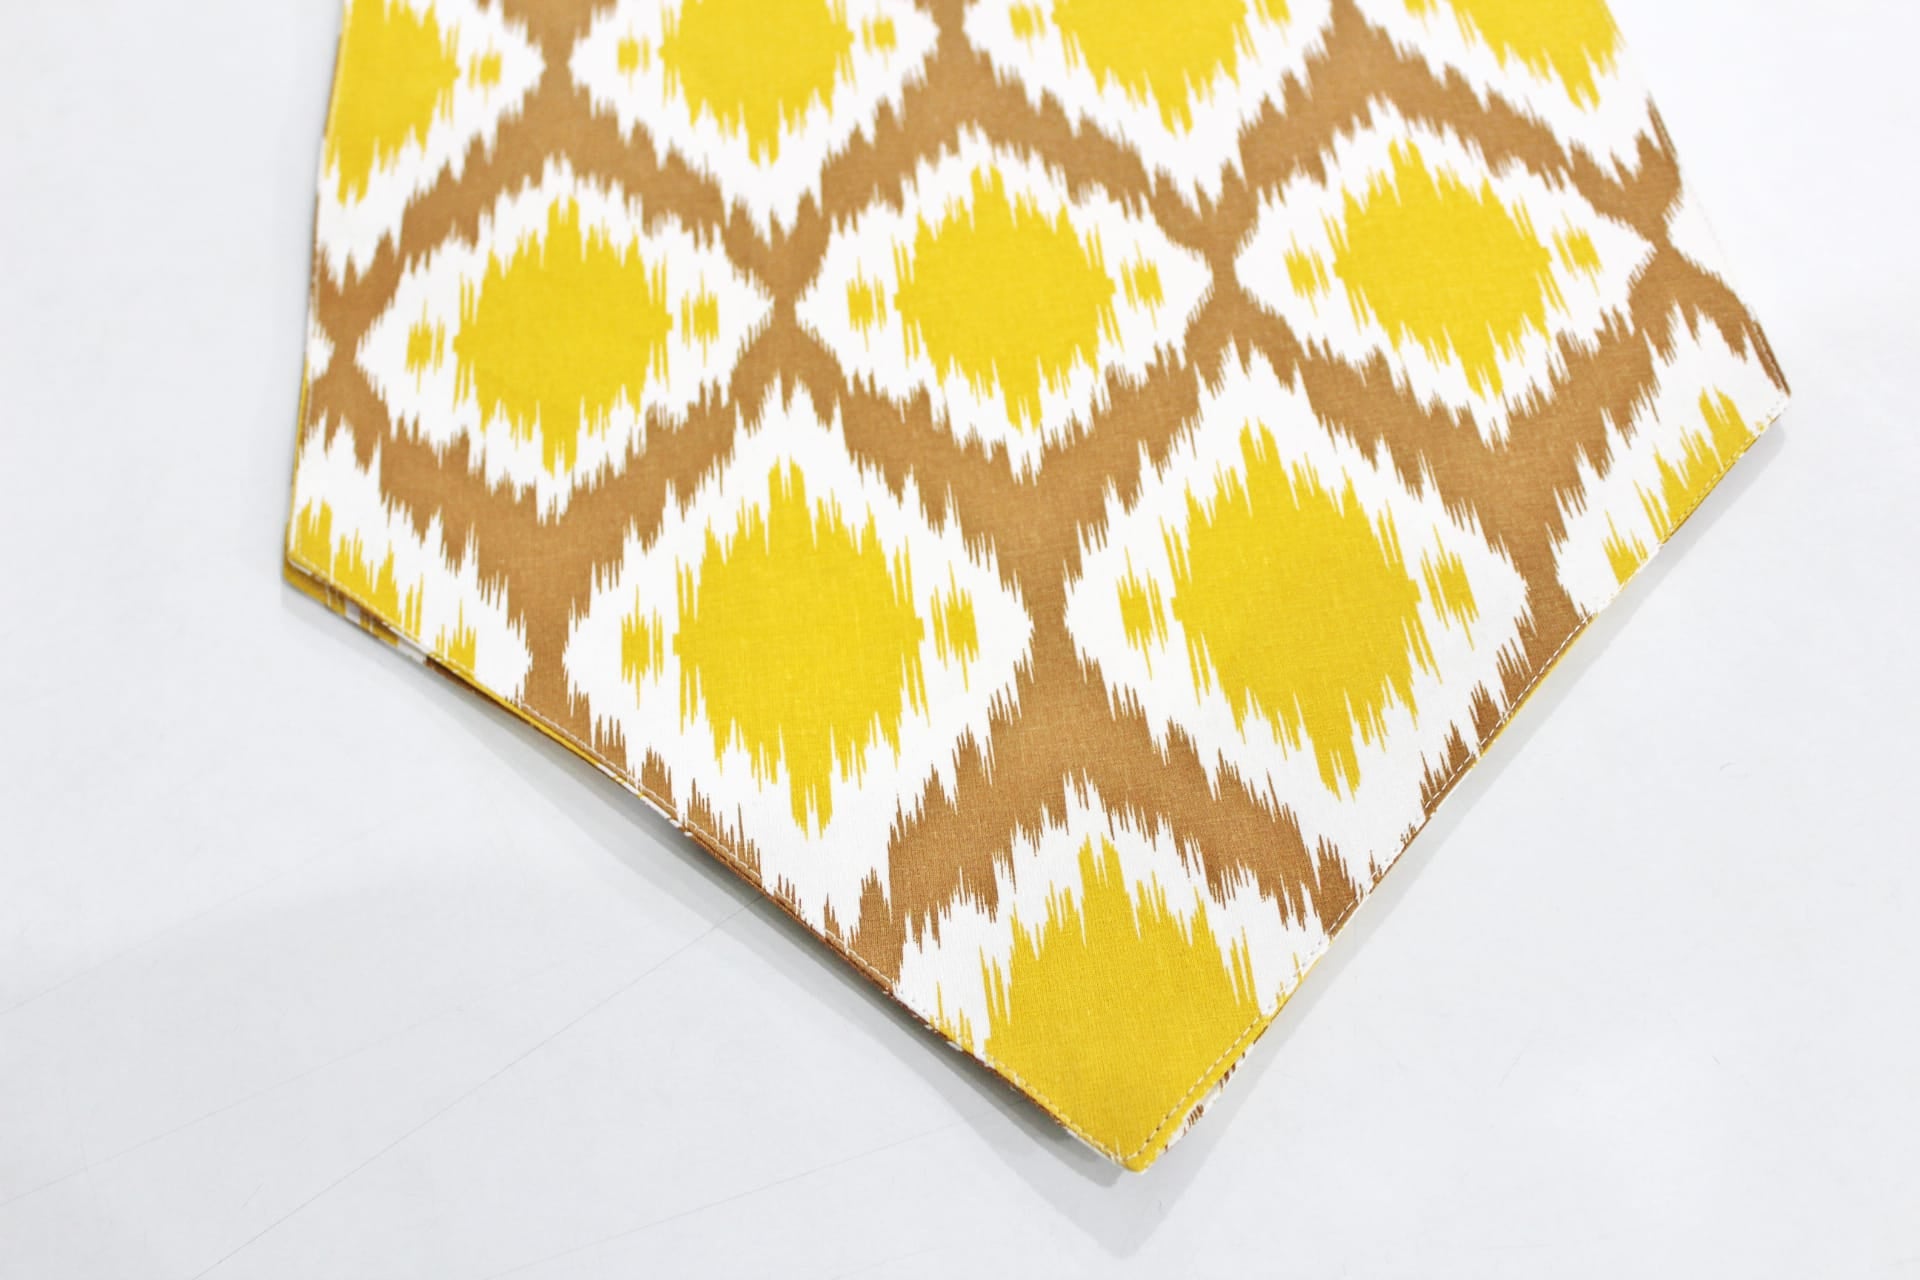 Cotton 144 TC Ikat Table Runner for 6 Seater Table - Mustard